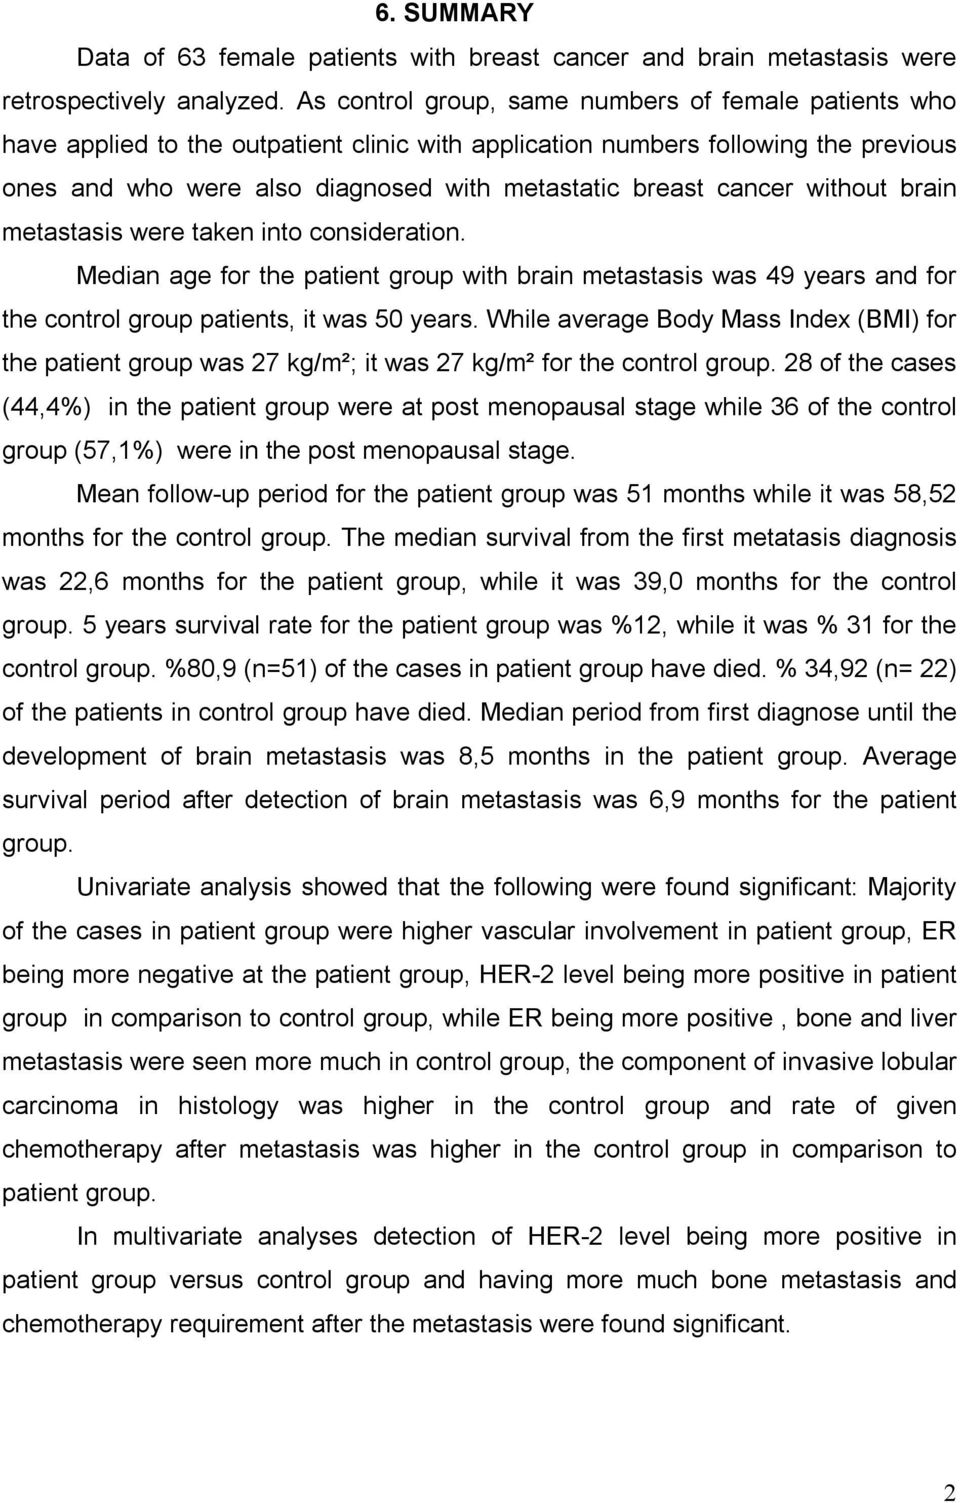 cancer without brain metastasis were taken into consideration. Median age for the patient group with brain metastasis was 49 years and for the control group patients, it was 50 years.